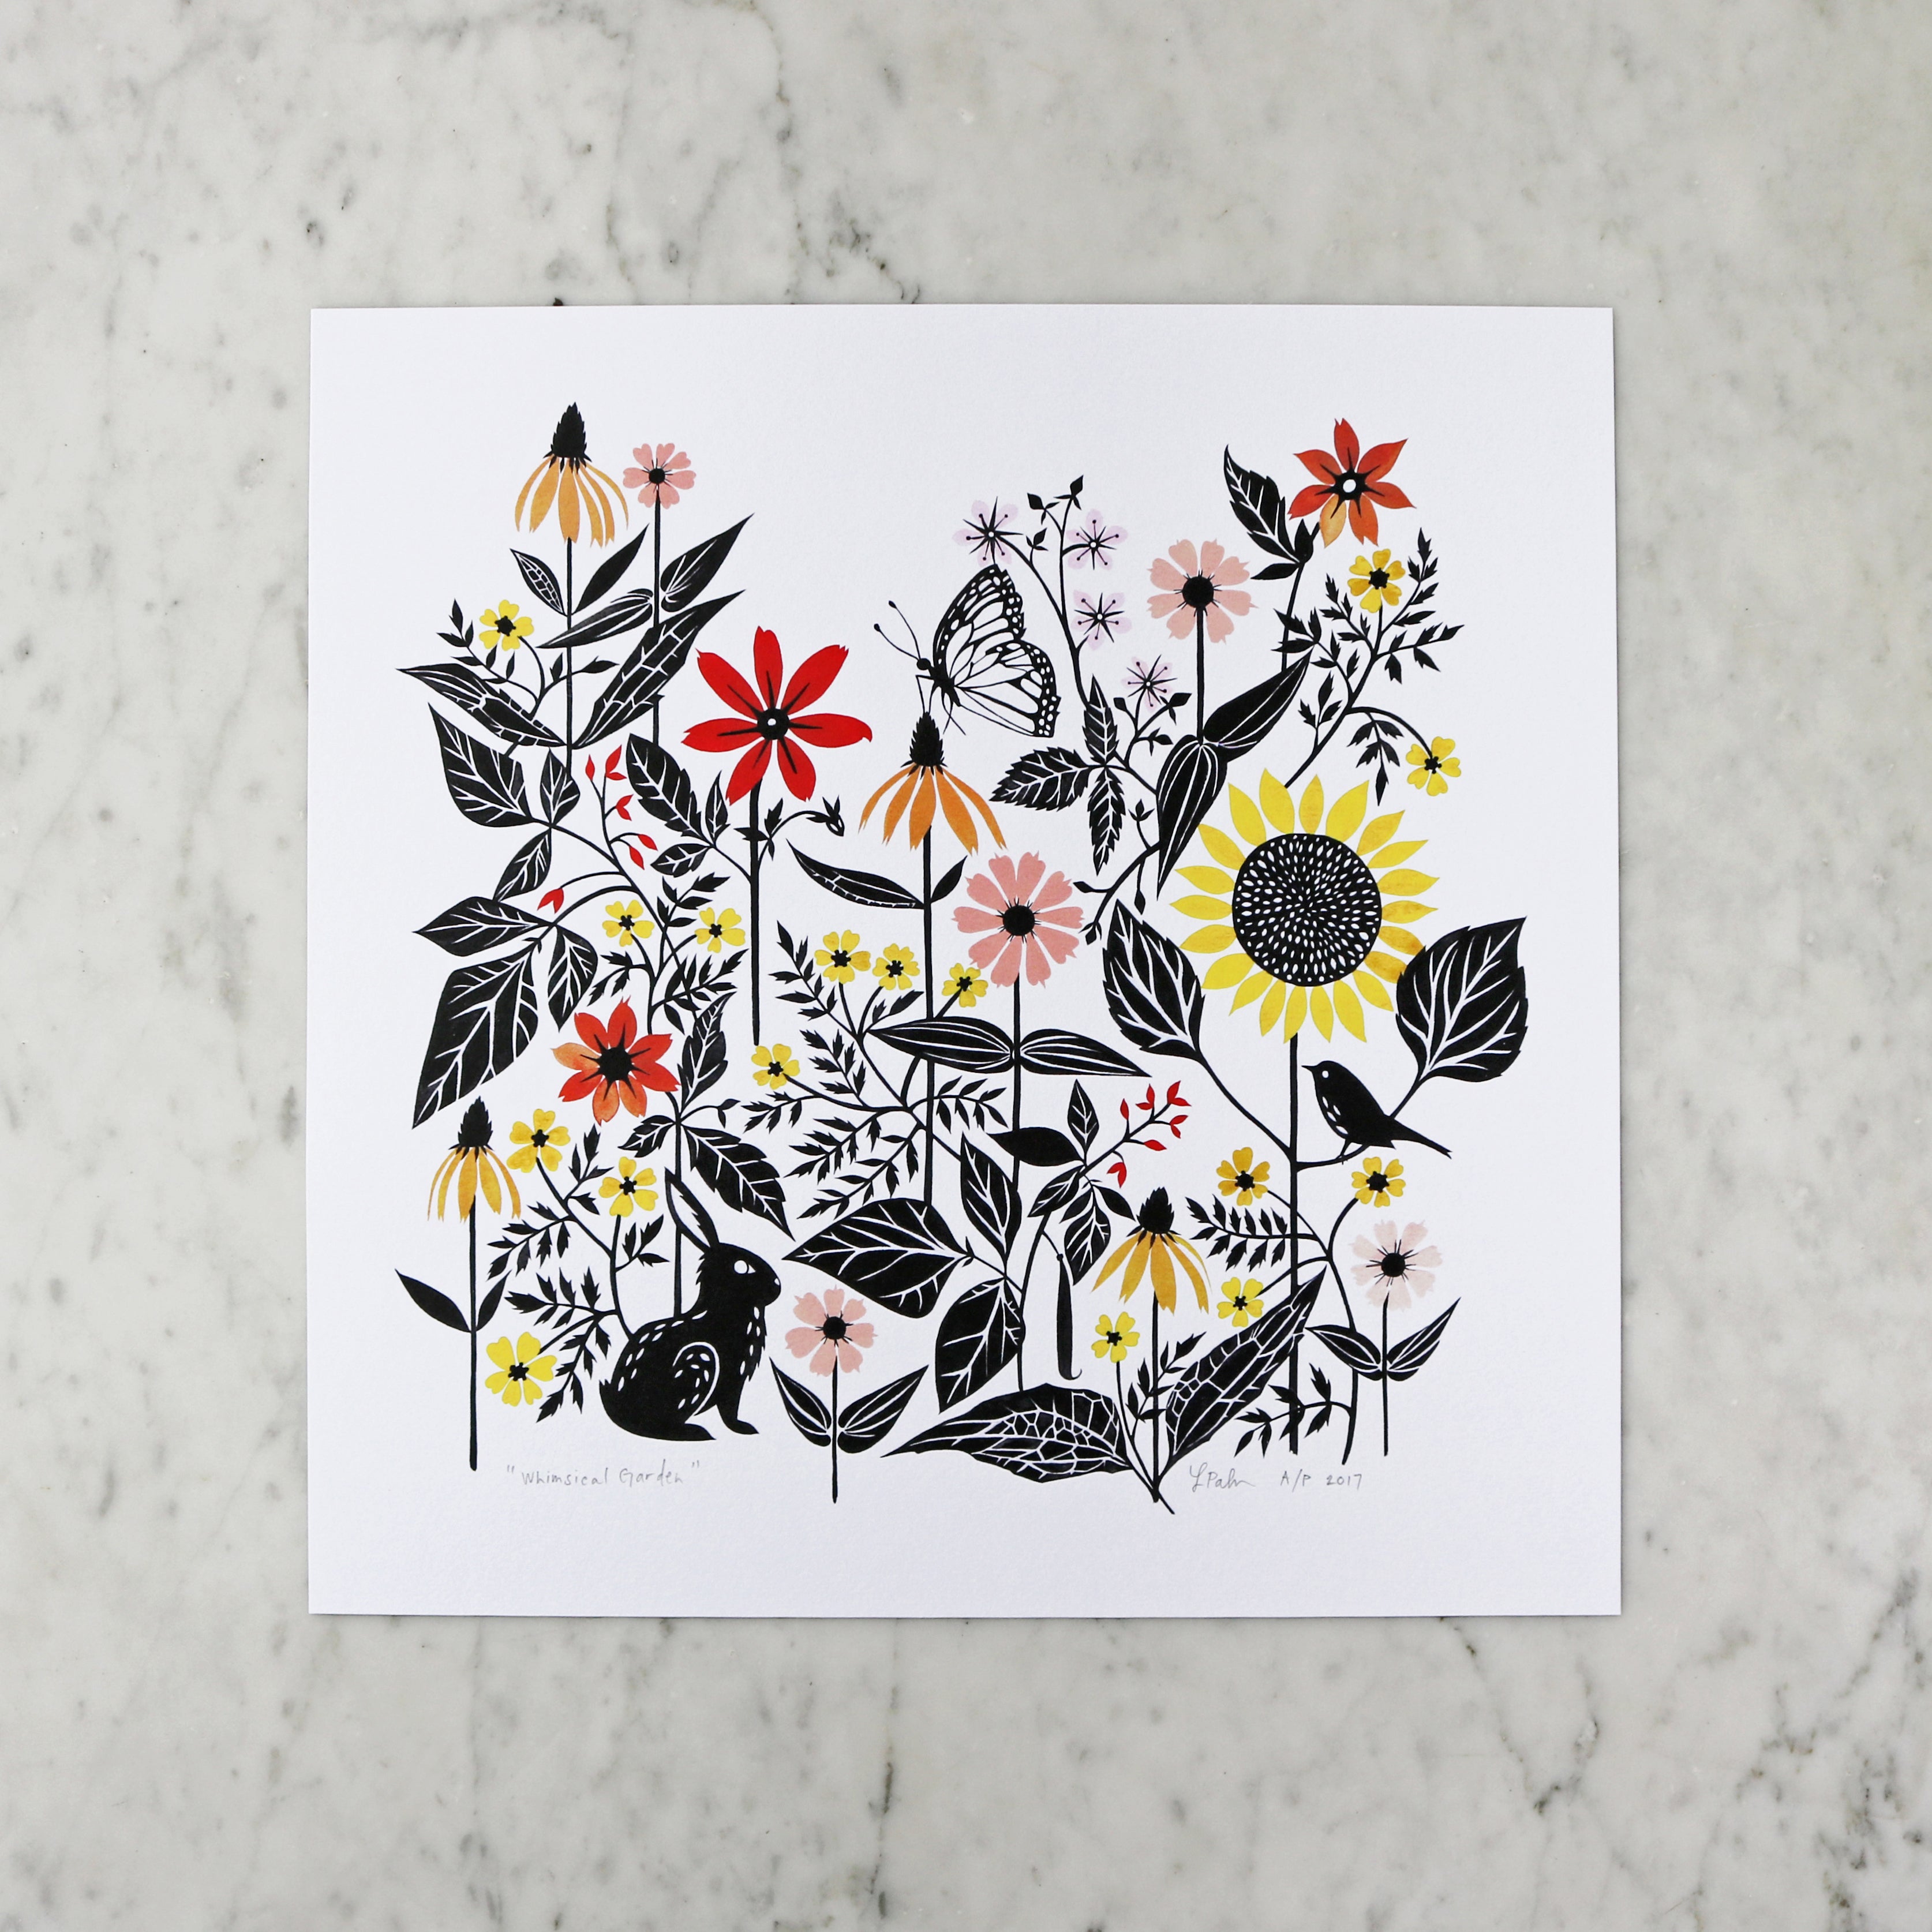 "Whimsical Garden" | Limited-Edition Art Print